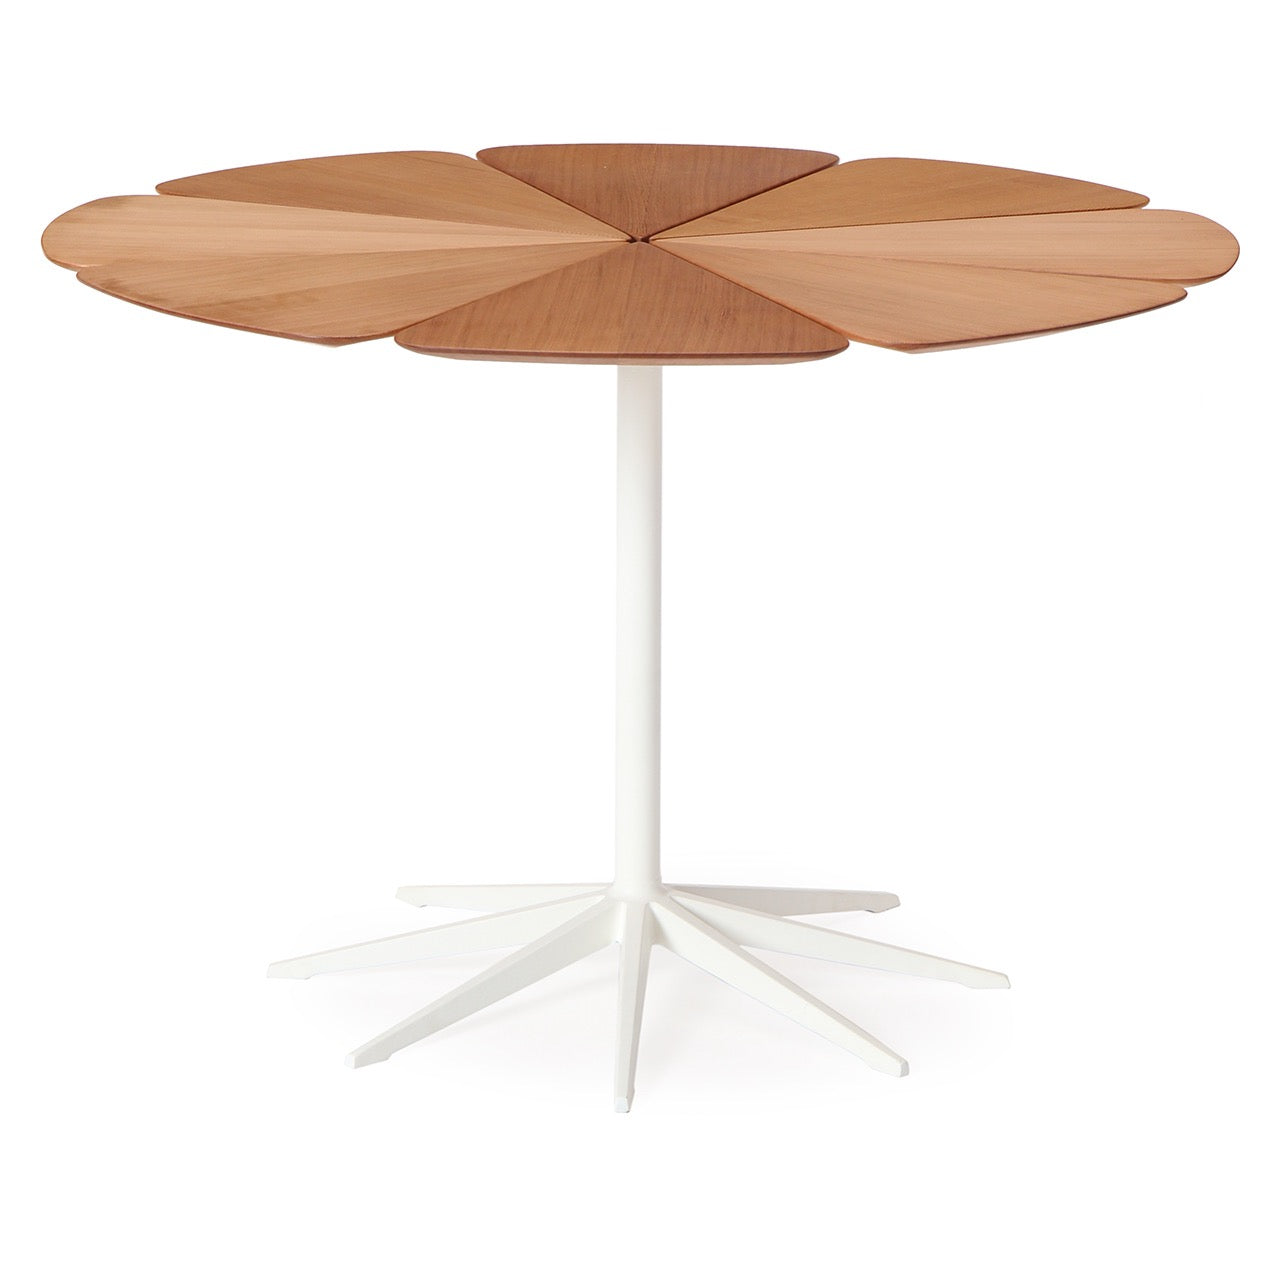 'Petal' Dining Table by Richard Schultz for Knoll, 1960